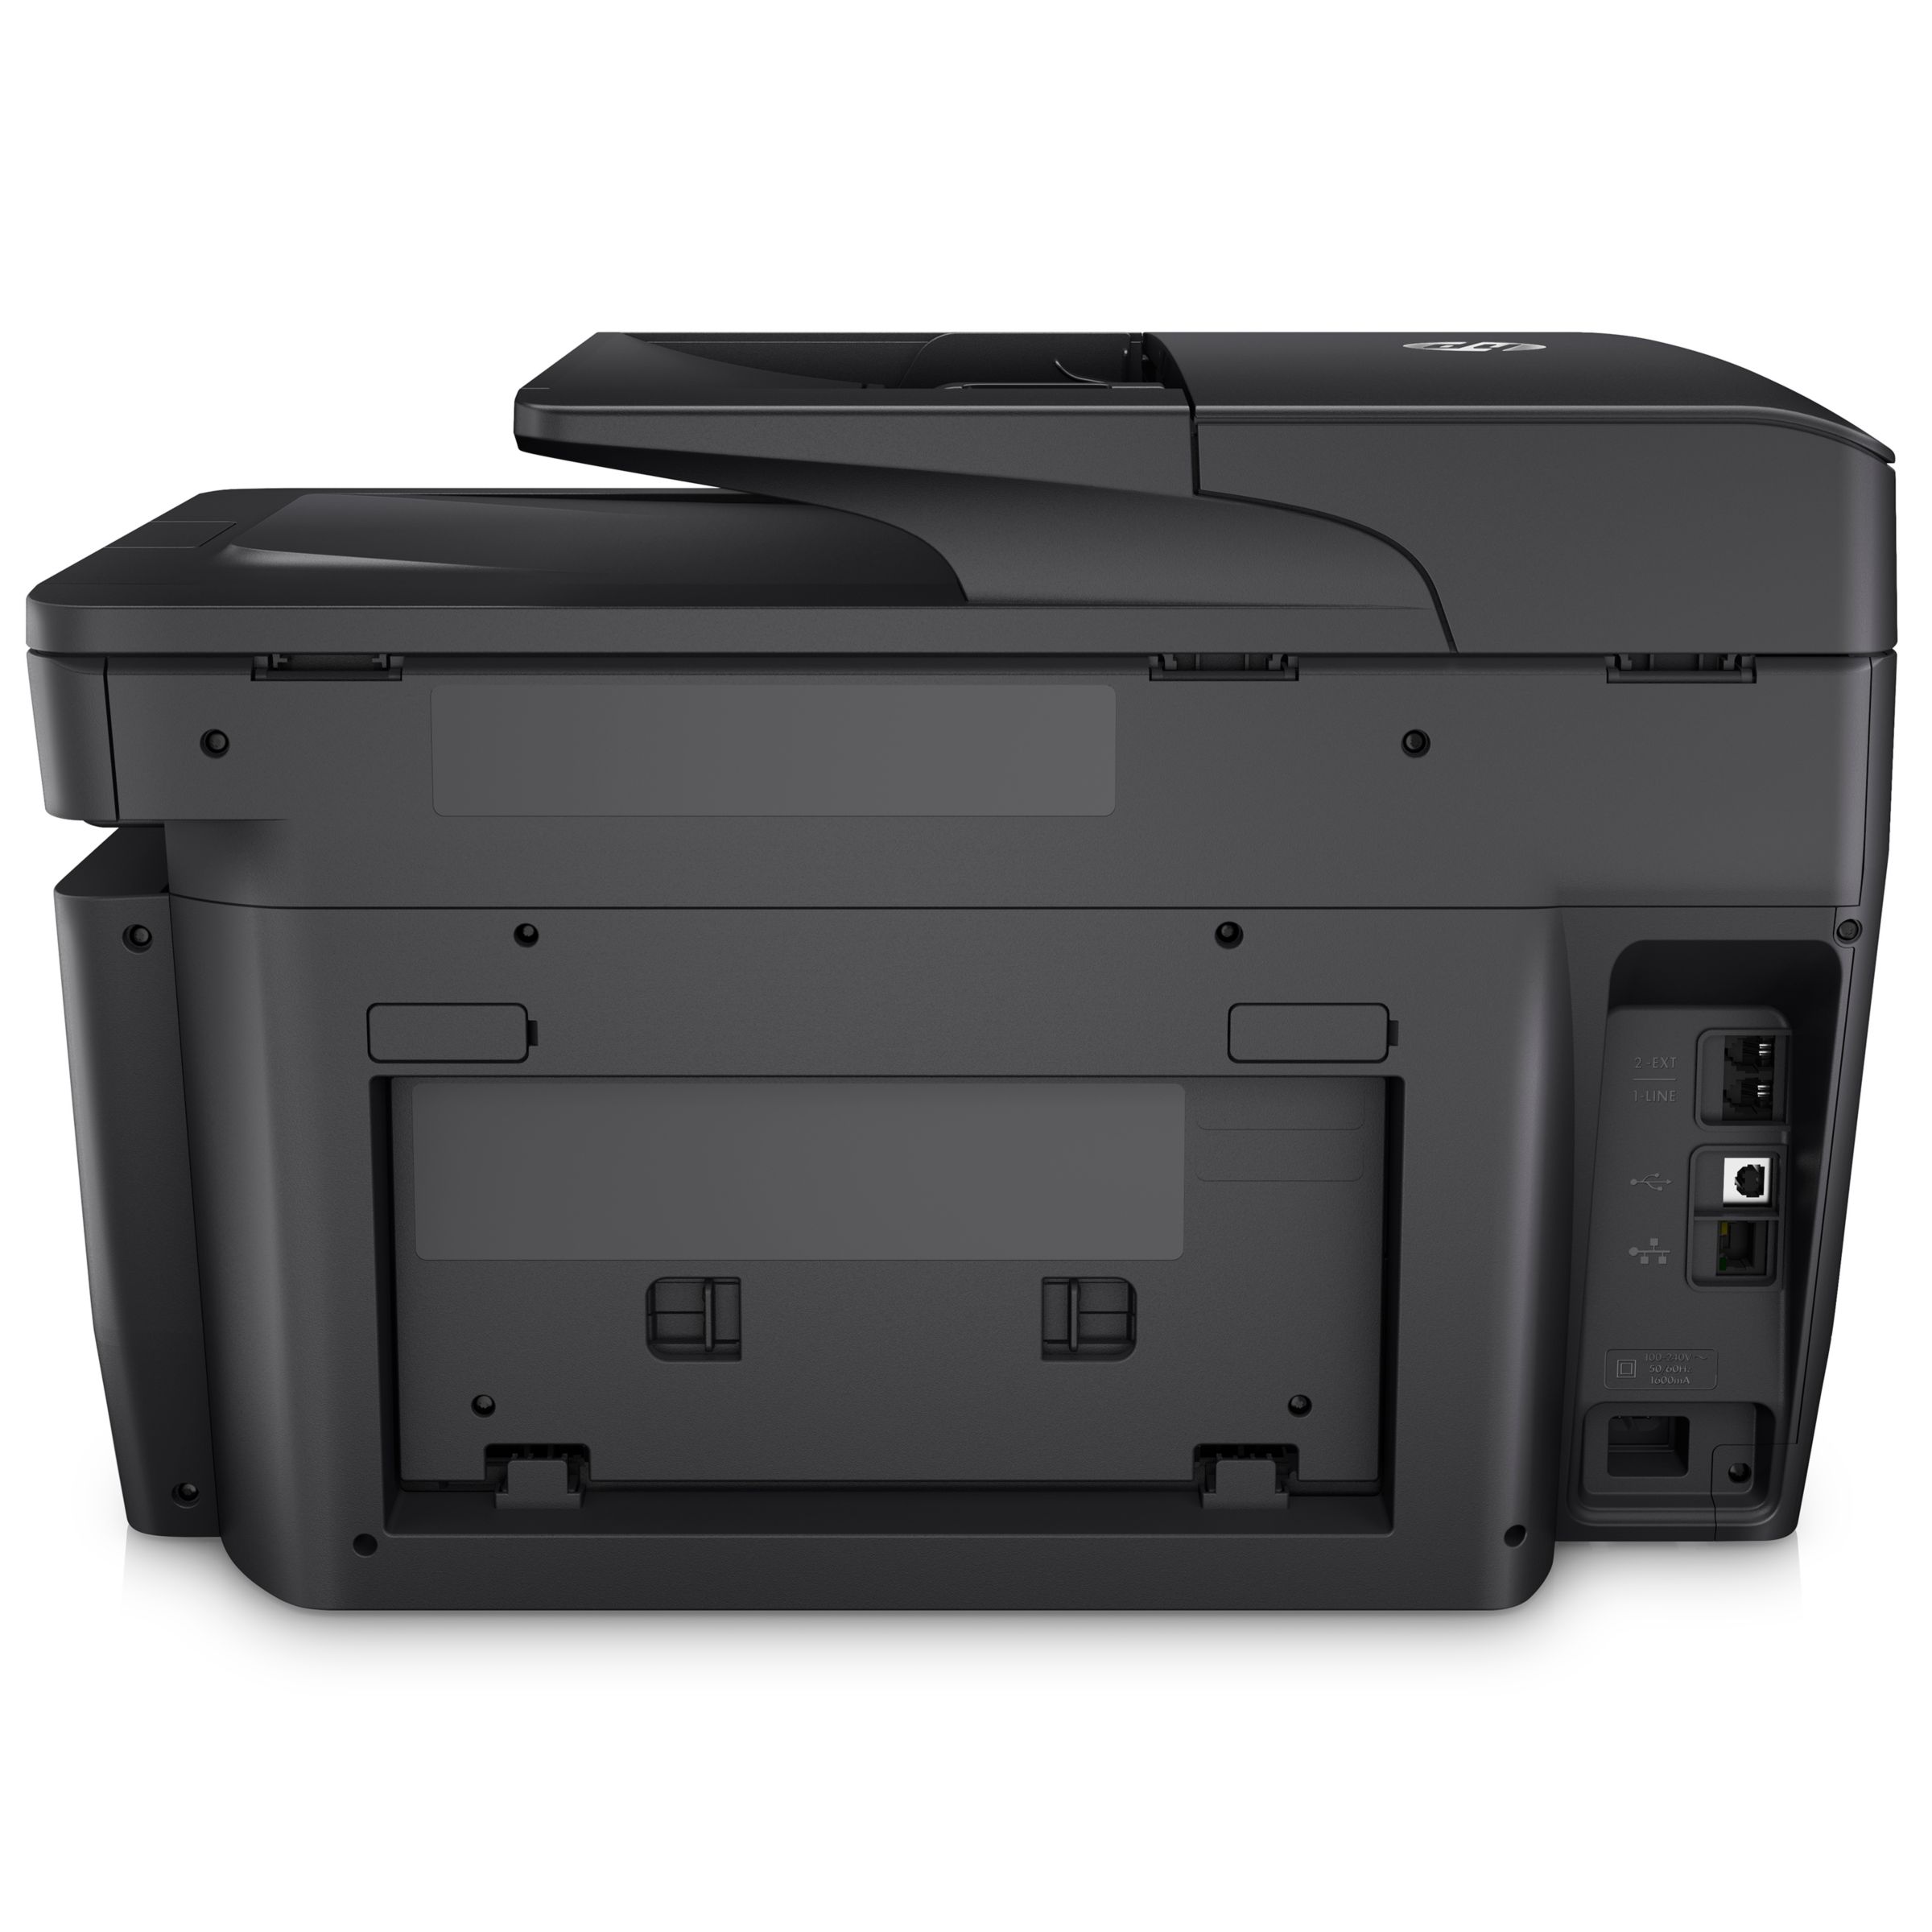 HP Officejet Pro 8725 Wireless Printer & Fax Machine with Touch Screen, HP Ink Compatible with 3 Months Trial